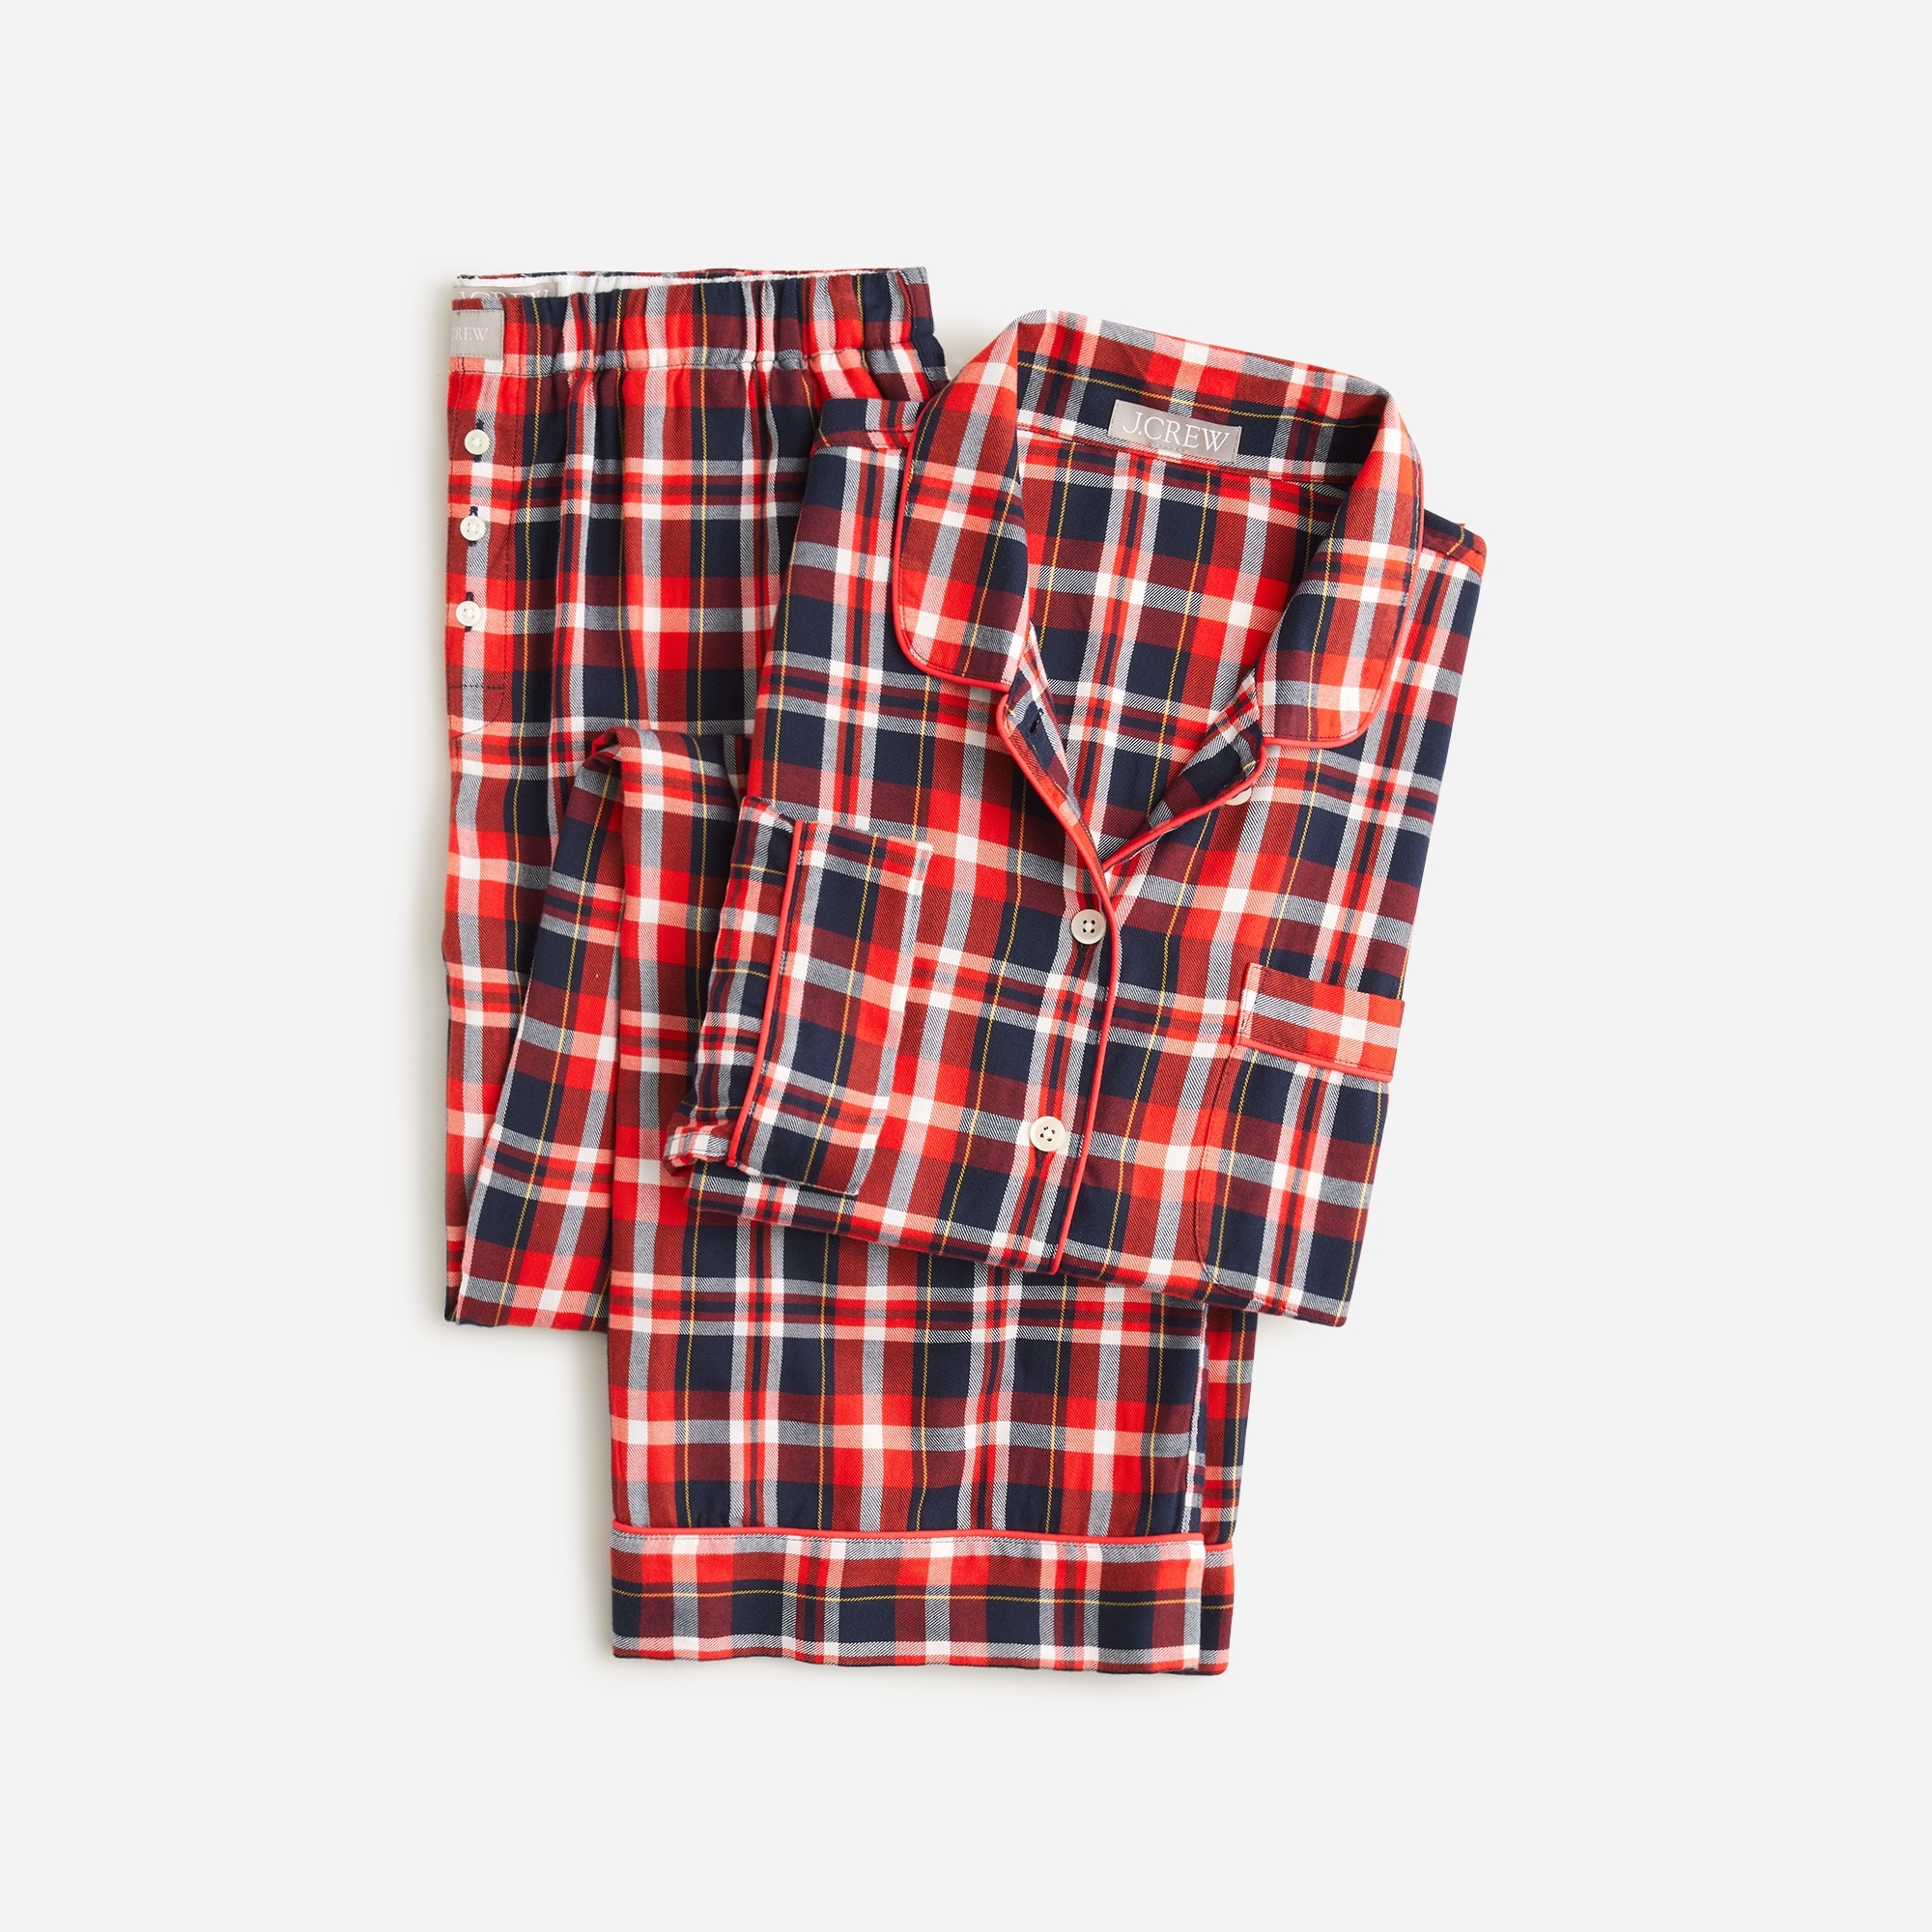  Flannel long-sleeve cropped pajama pant set in plaid